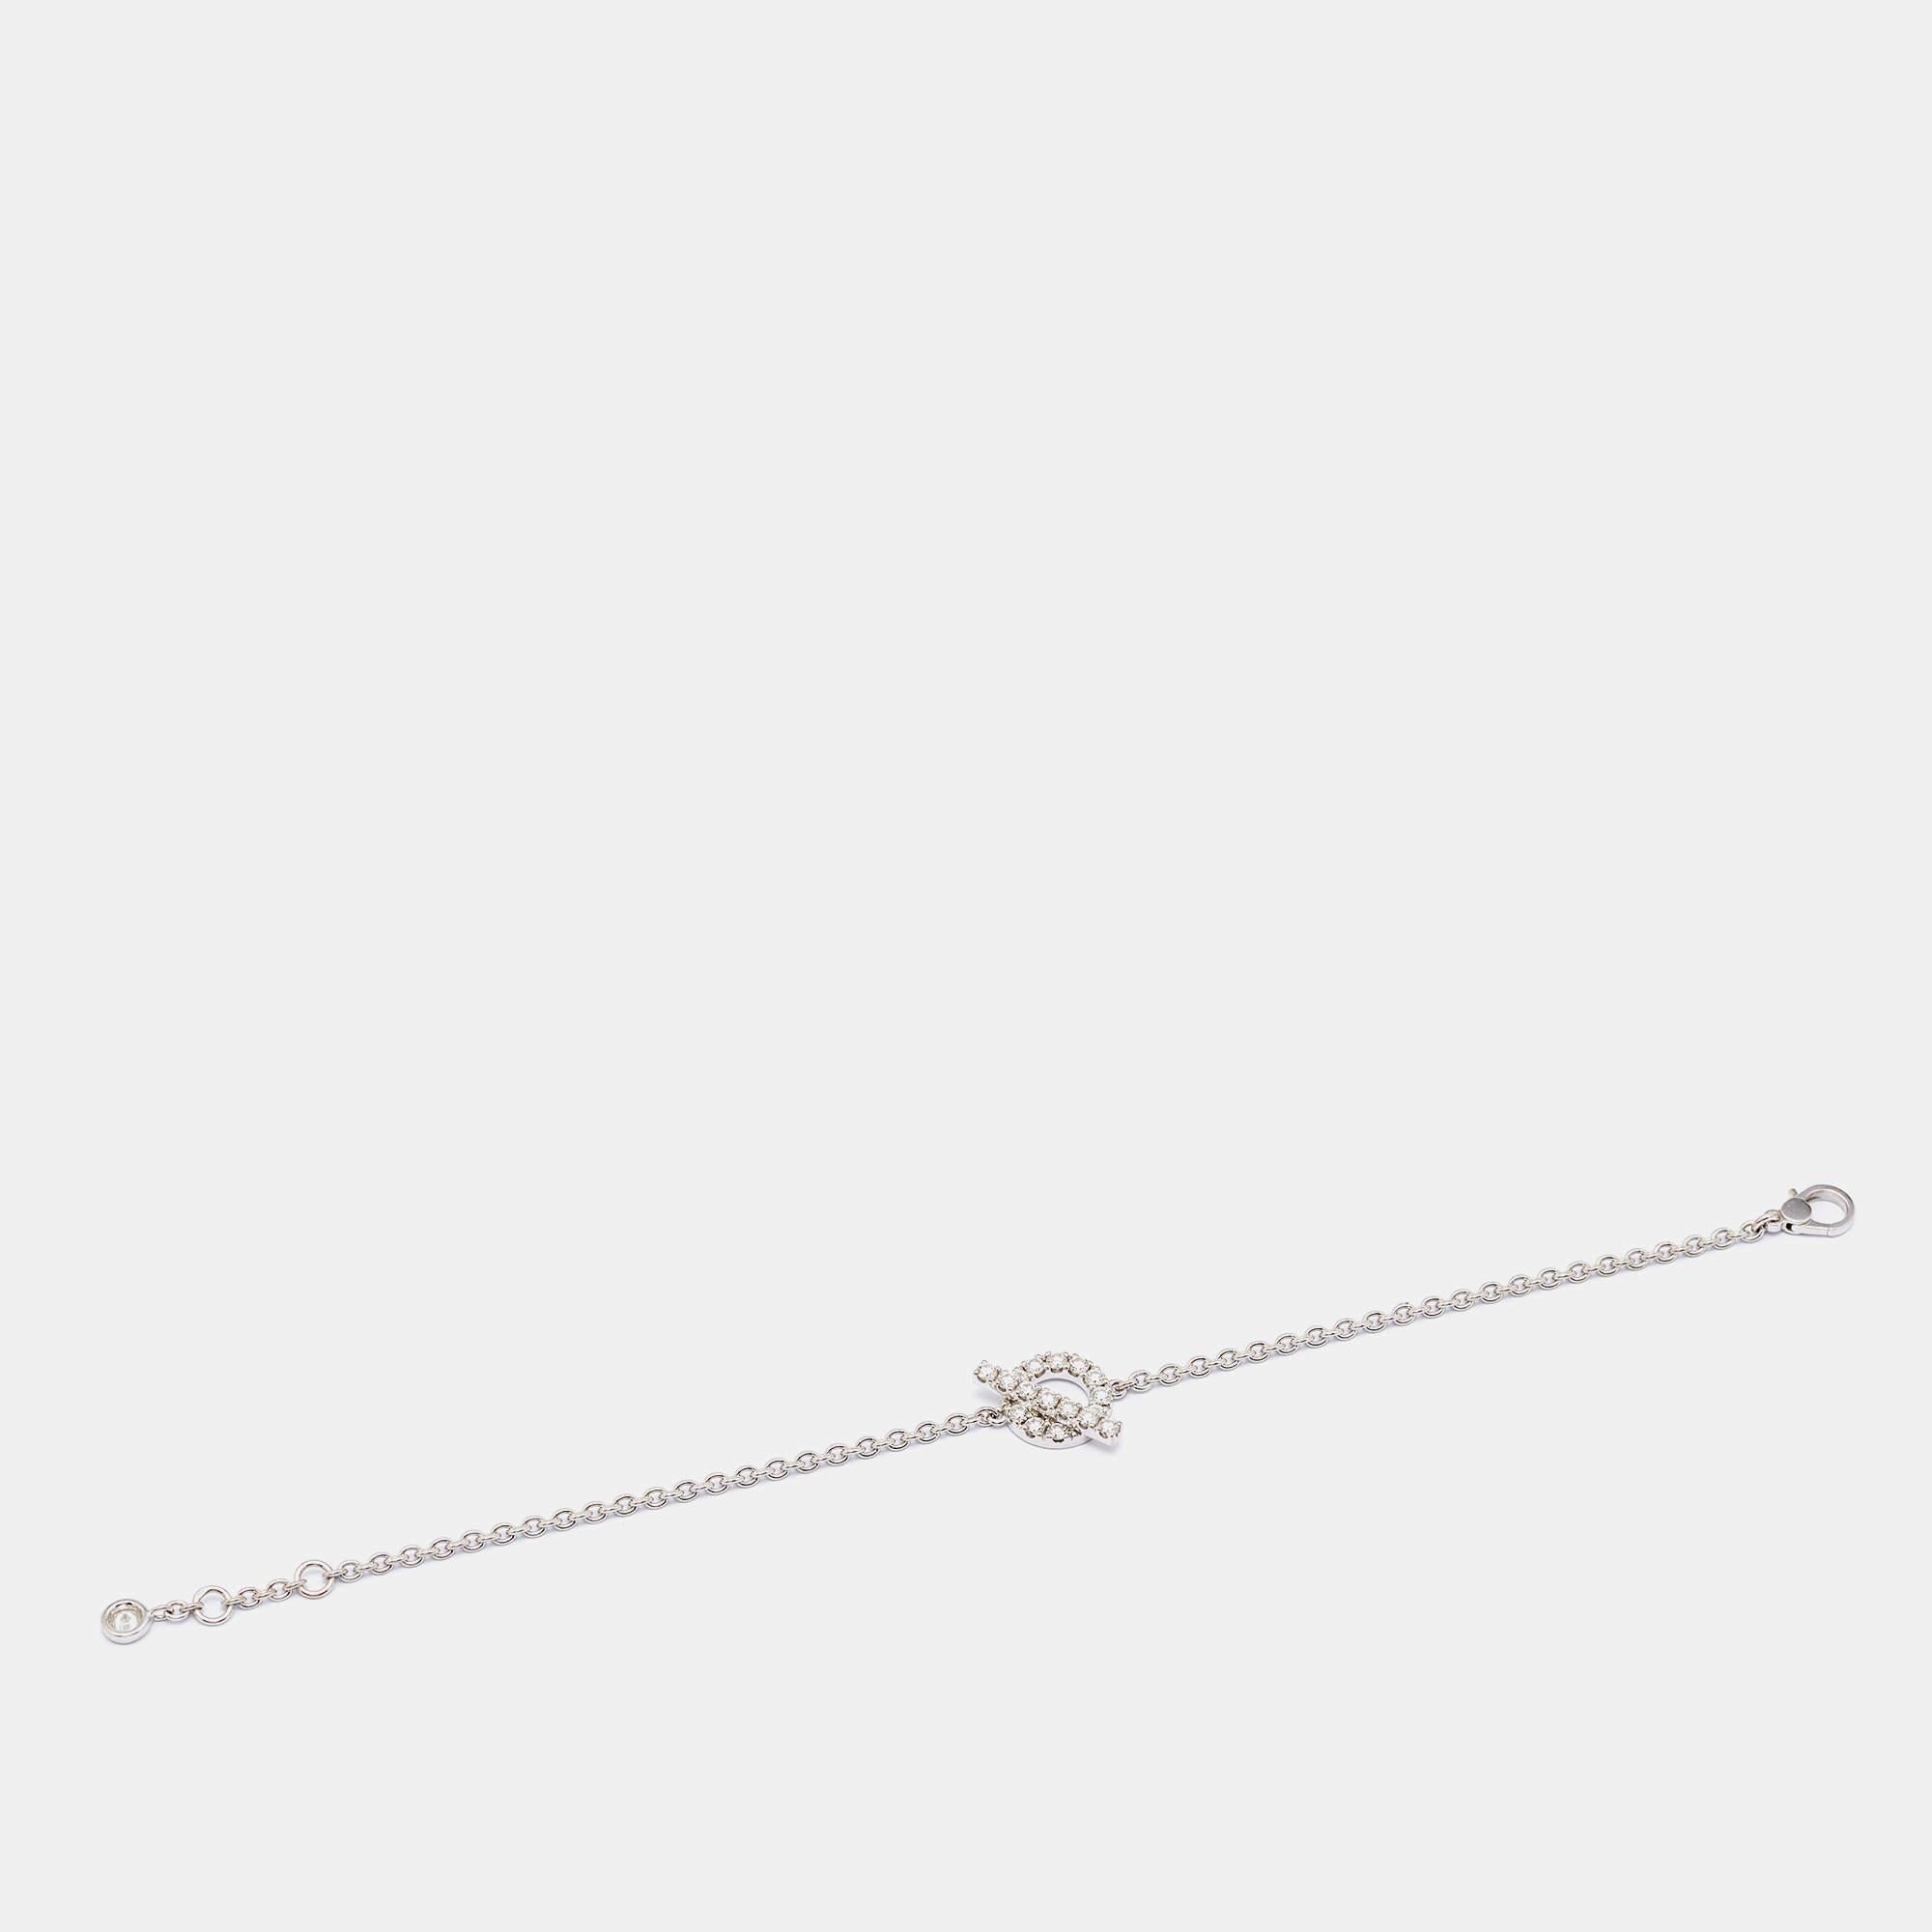 A diamond-studded toggle clasp becomes the centerpiece of this Hermes Finesse bracelet. Created in 18k white gold, the bracelet has a lovely fit and luxurious appeal.

Includes
Original Box, Original Case